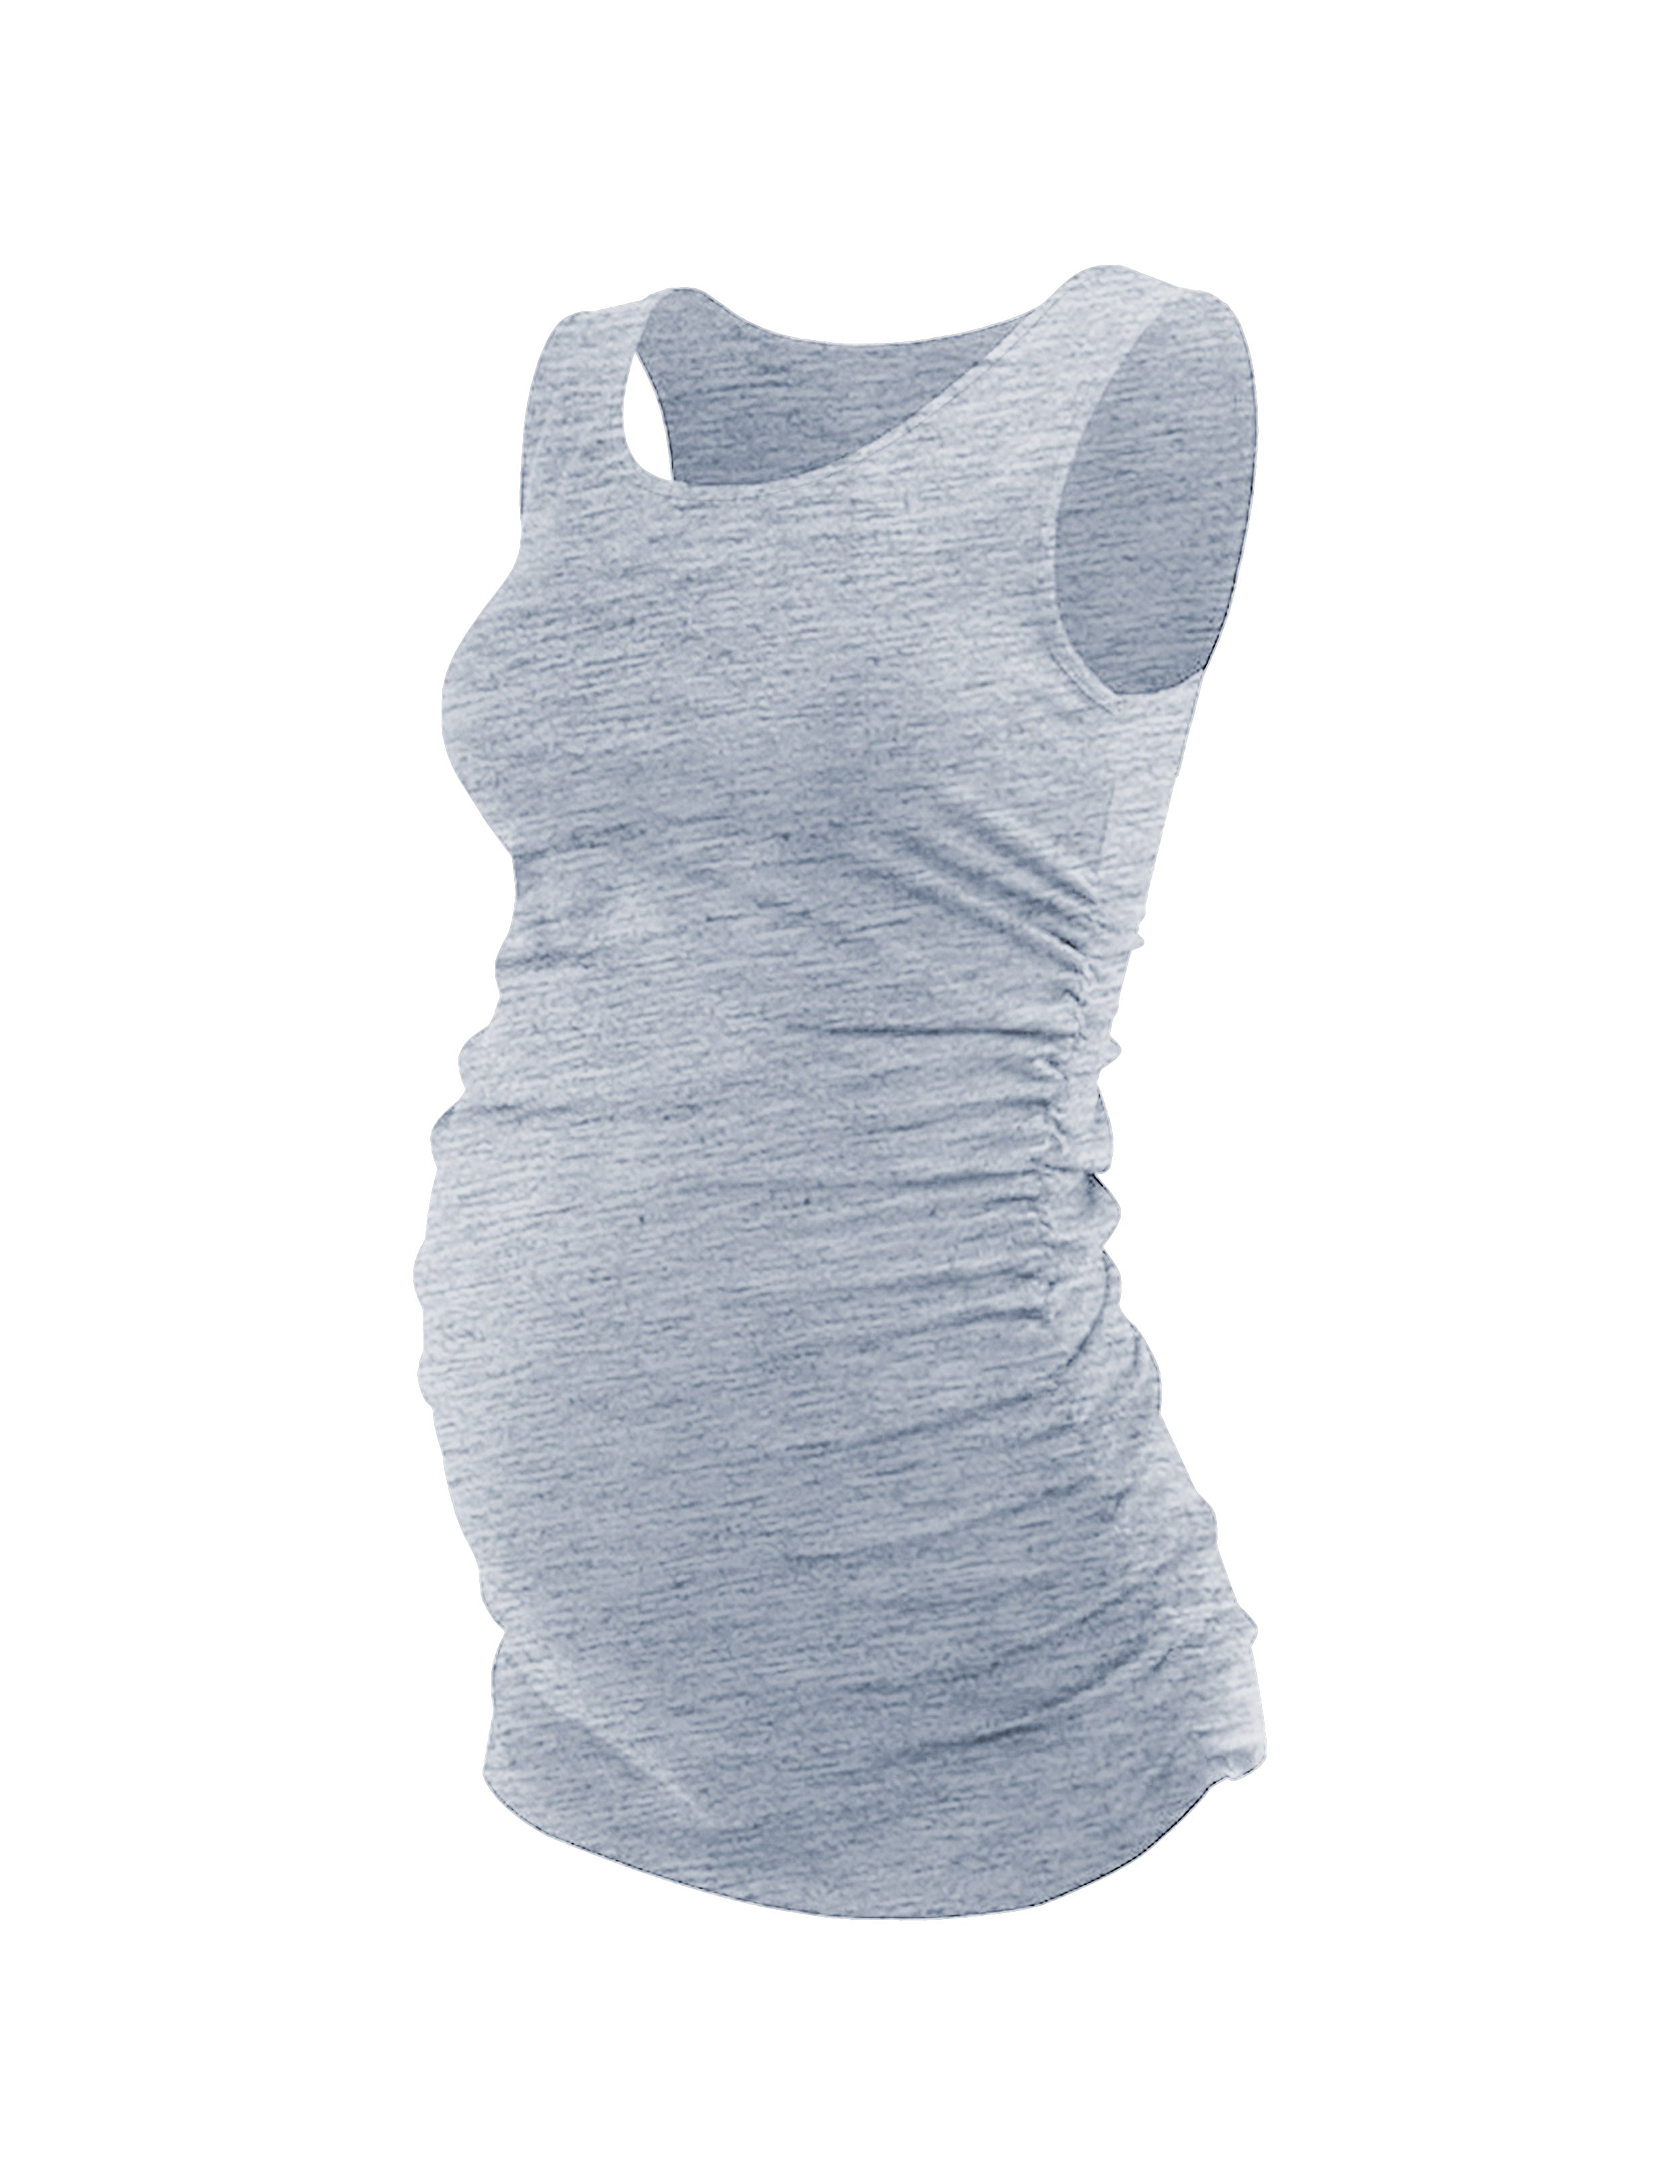 Maternity Side Shirred Tank Top heathergray 92%Nylon/8%Spandex(Cotton Soft) Designed for Maternity So buttery soft, it feels weightless Sweat-wicking Four-way stretch Breathable Contours your body